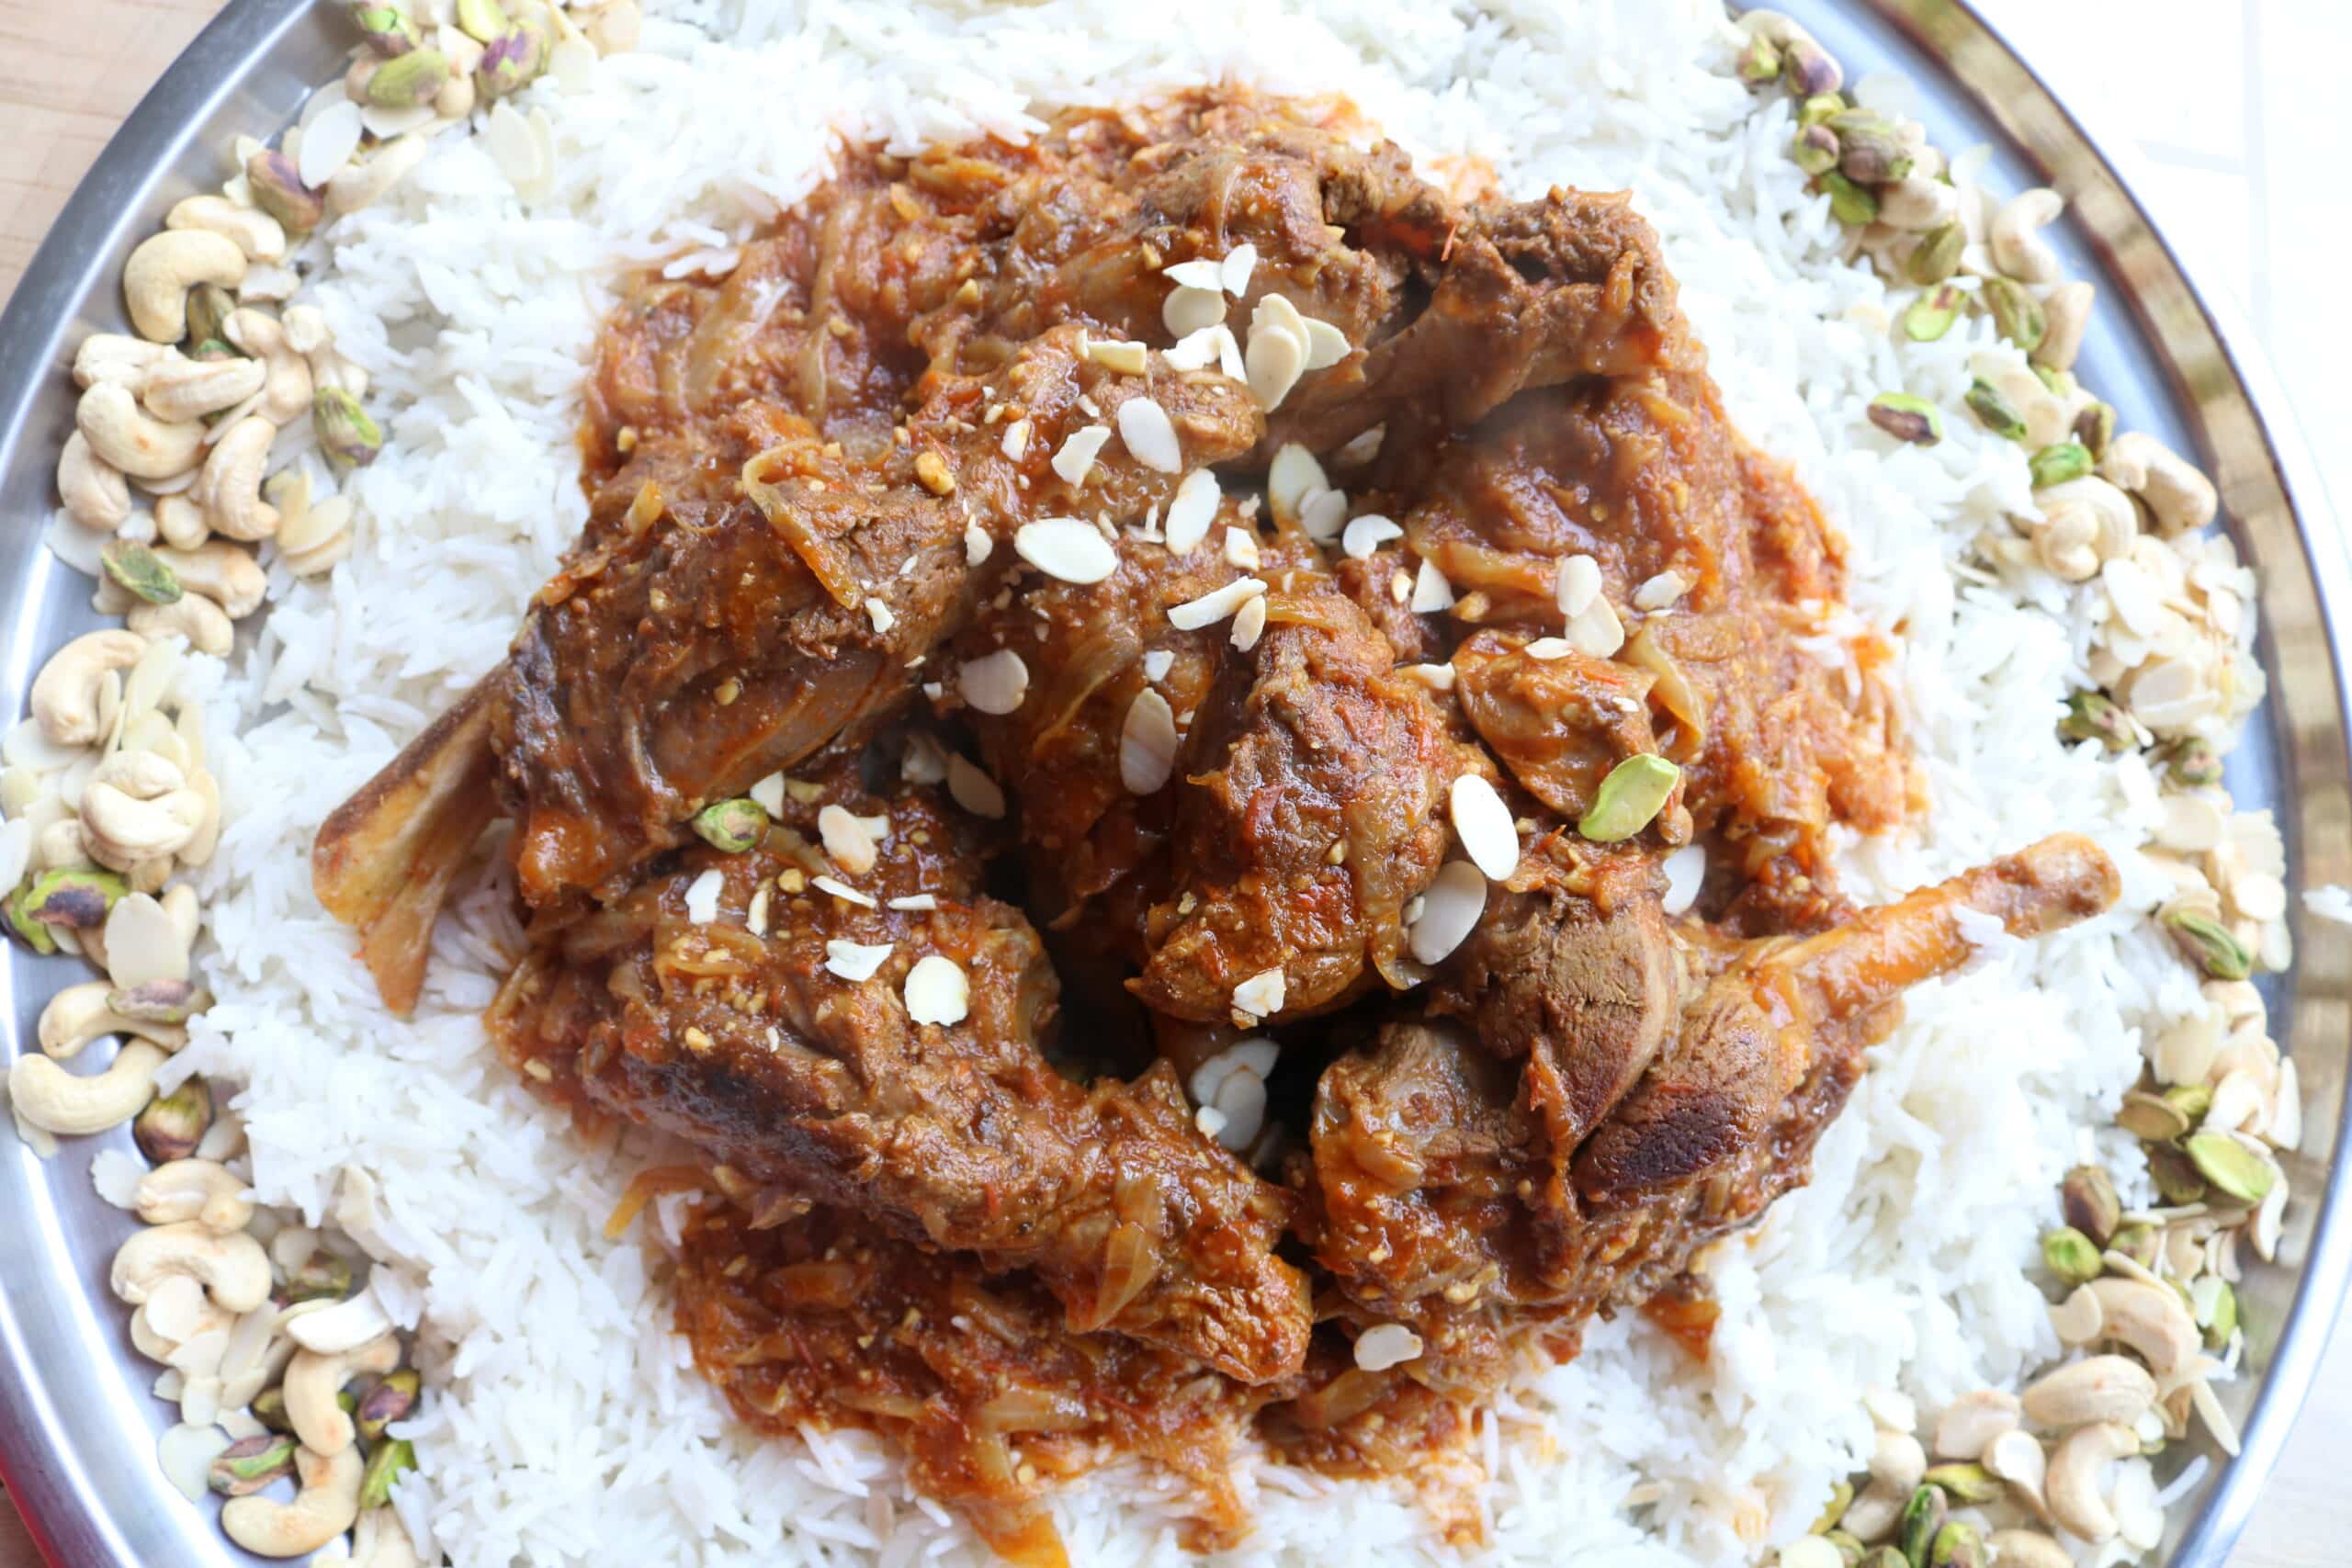 lamb shanks on bed of rice and nuts